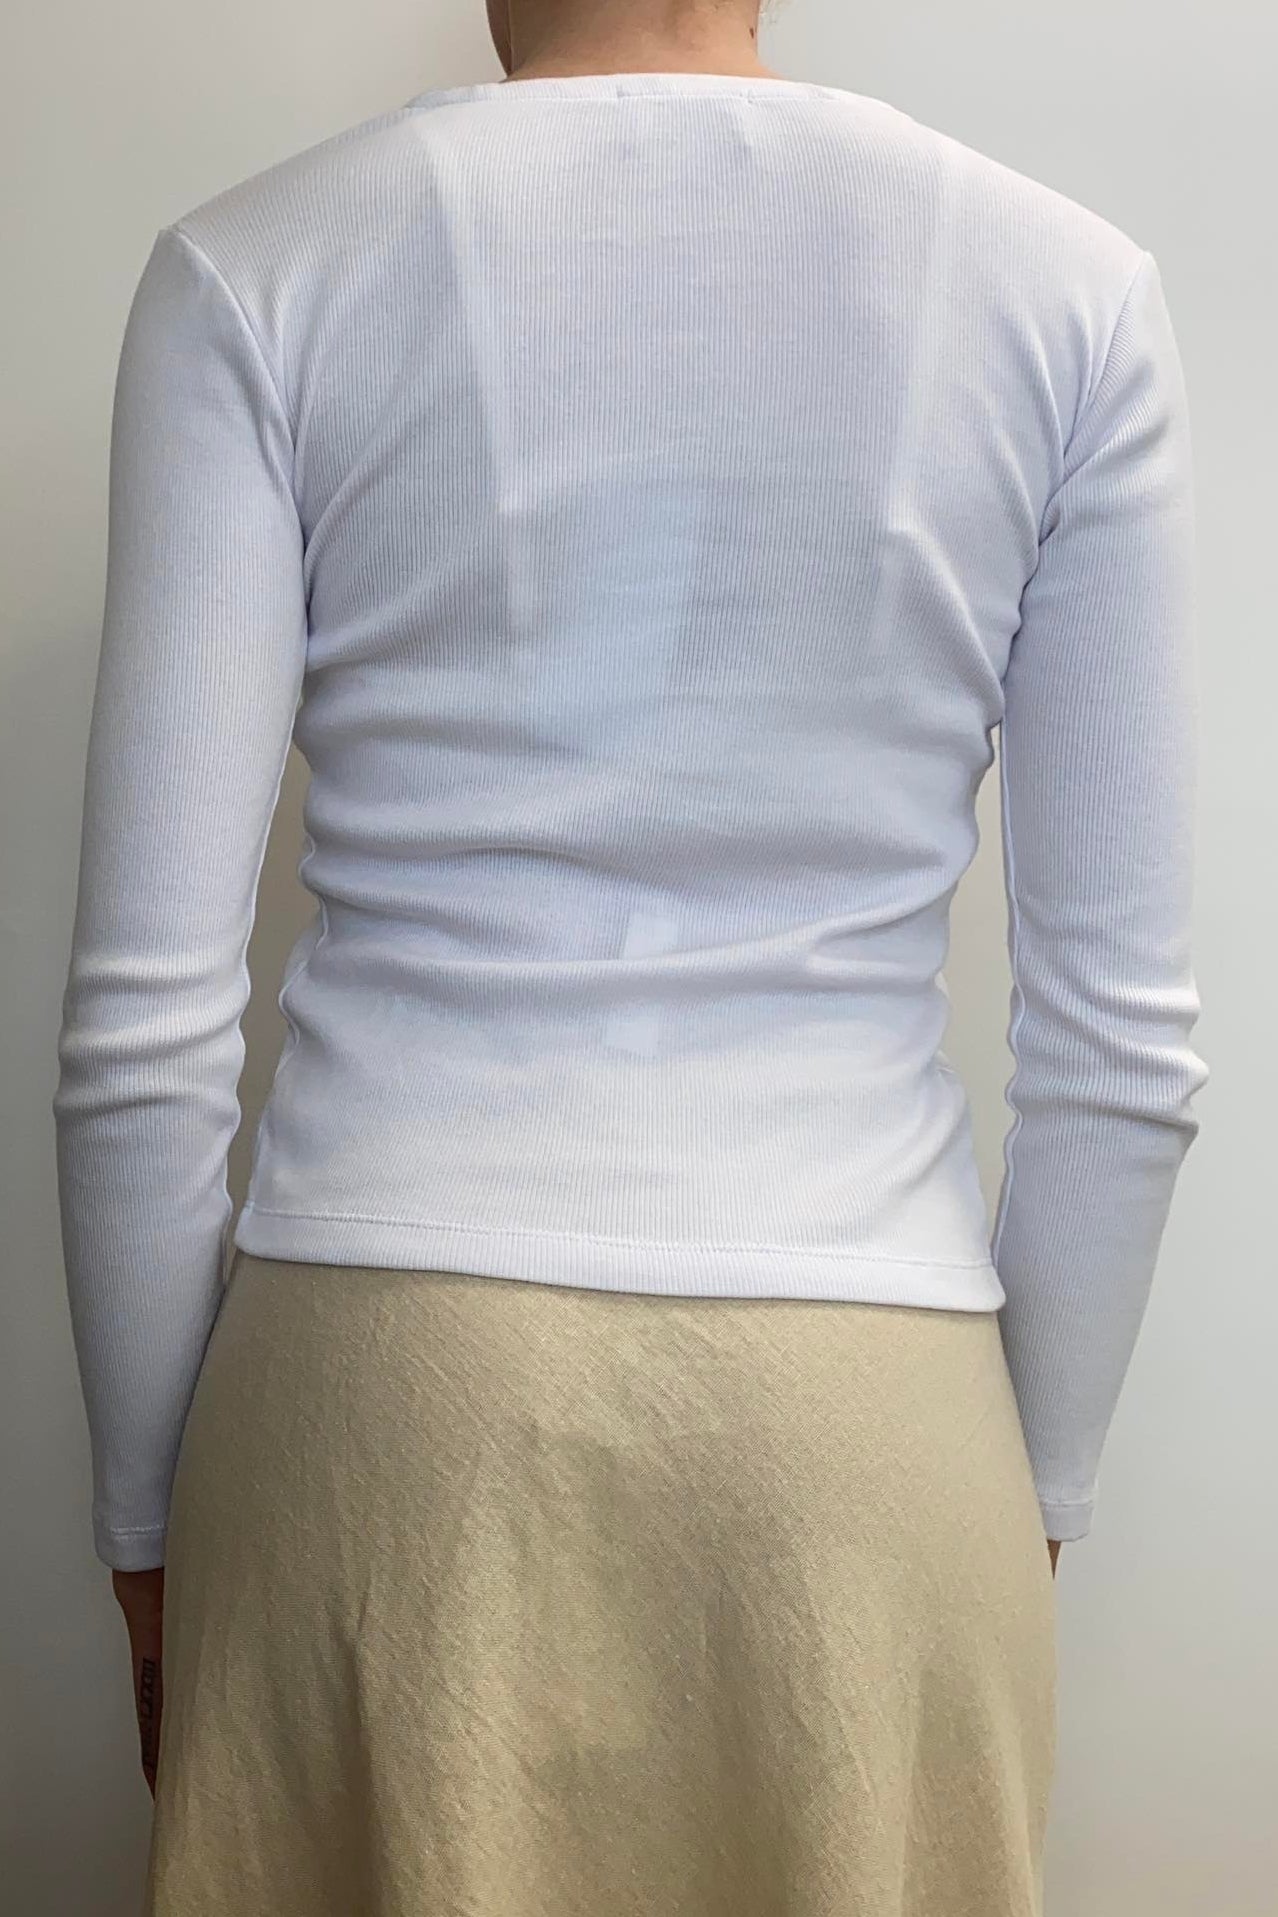 BLAK STAY WITH ME CARDI - WHITE  The Blak Stay With Me Cardi is a simple, form-fitting long sleeve now available in; White.  The Stay With Me Cardi features a flattering v-neckline, moving to a button-up front, finished with the split below the buttons.